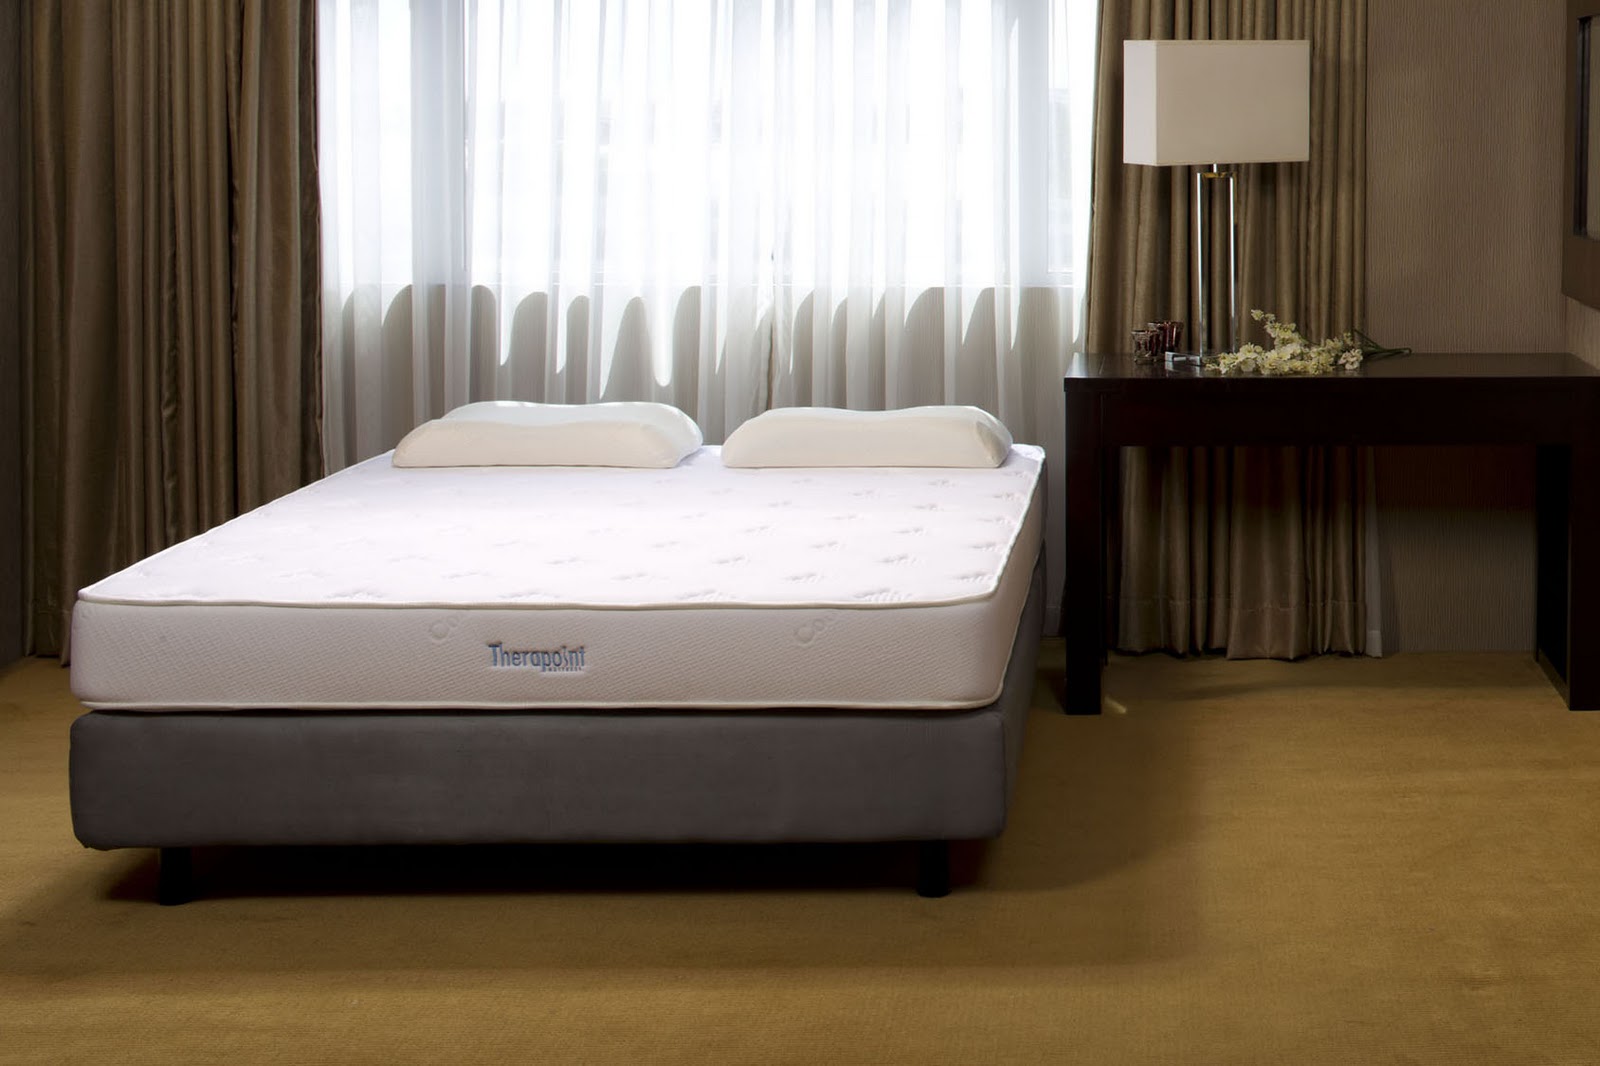 uratex bed mattress for sale philippines